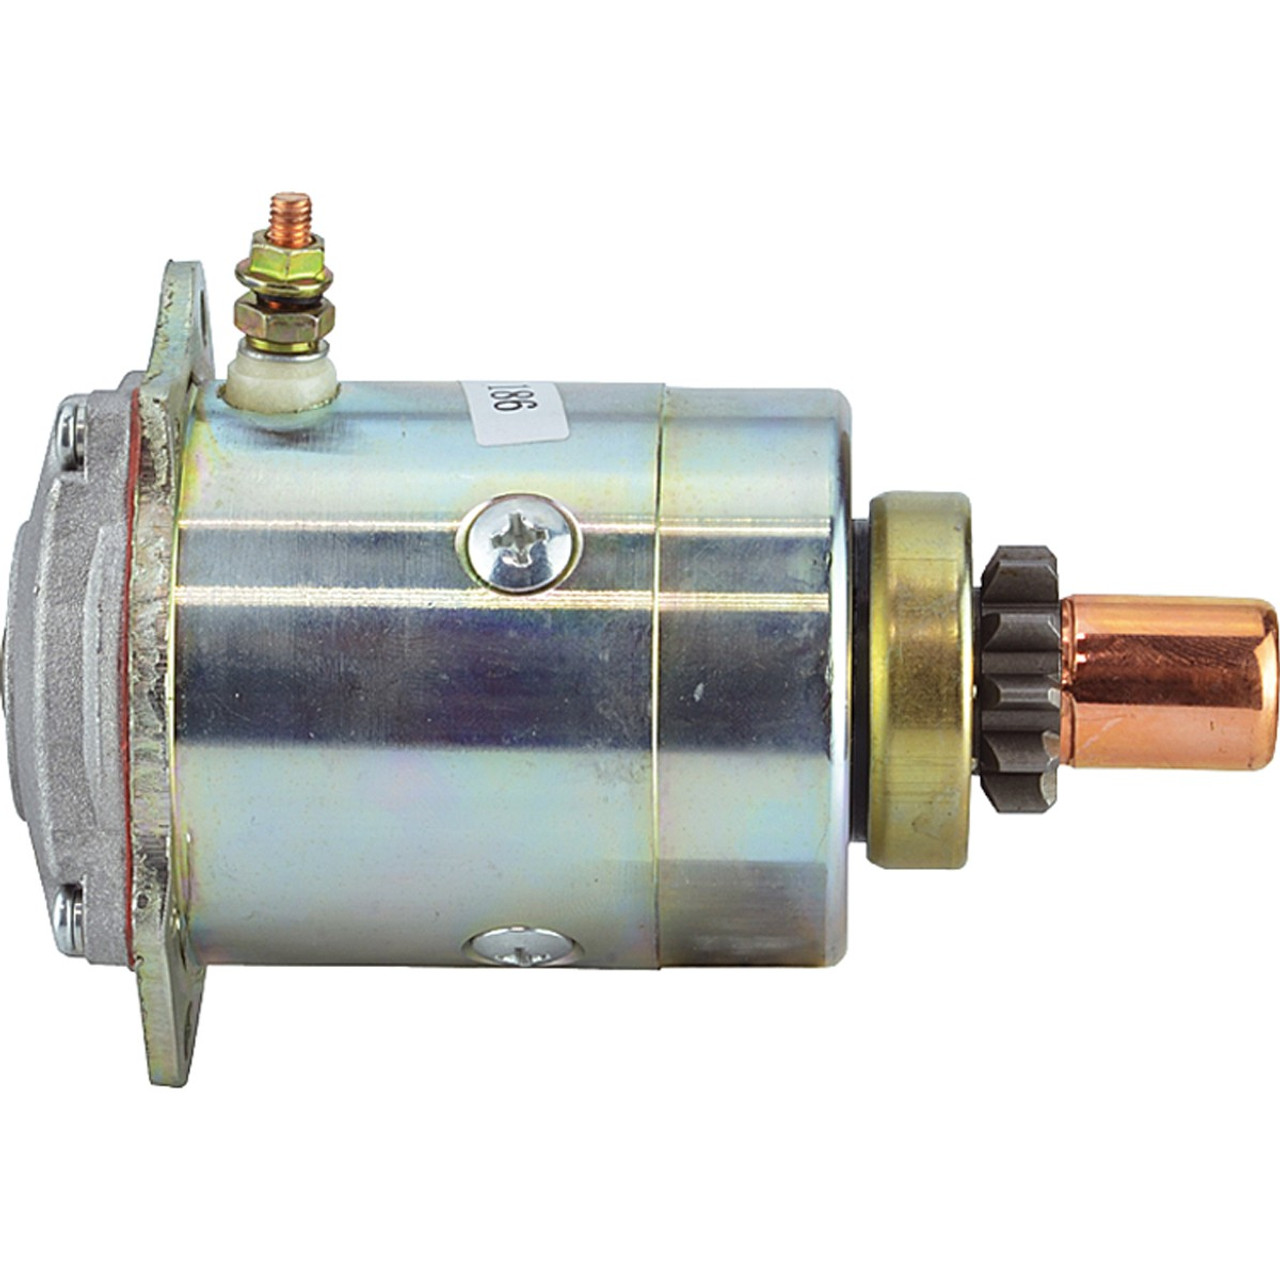 DB Electrical New Starter for Piaggio Vespa PK50 PK125 Ape 50 EFEL 179116 12-Volt CCW 11-Tooth